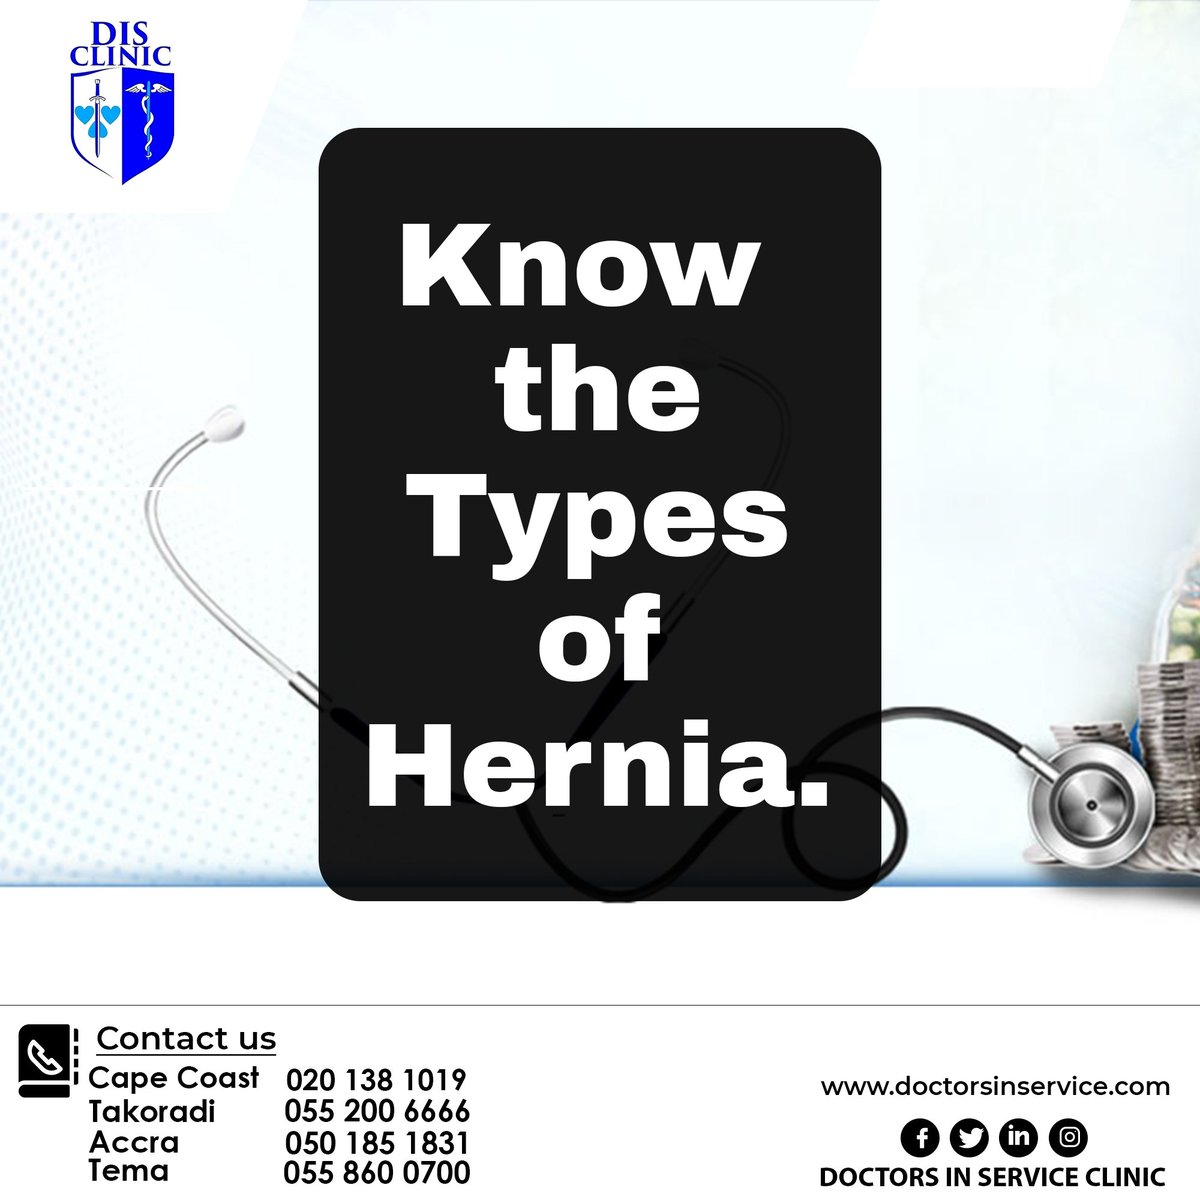 🔍 Know the Types of Hernias 🔍 Hernias can occur in various parts of the body. Some common types include:
📍inguinal hernias (groin area)
📍 femoral hernias (upper thigh)
 #disclinic #HerniaAwarenessMonth
1/3